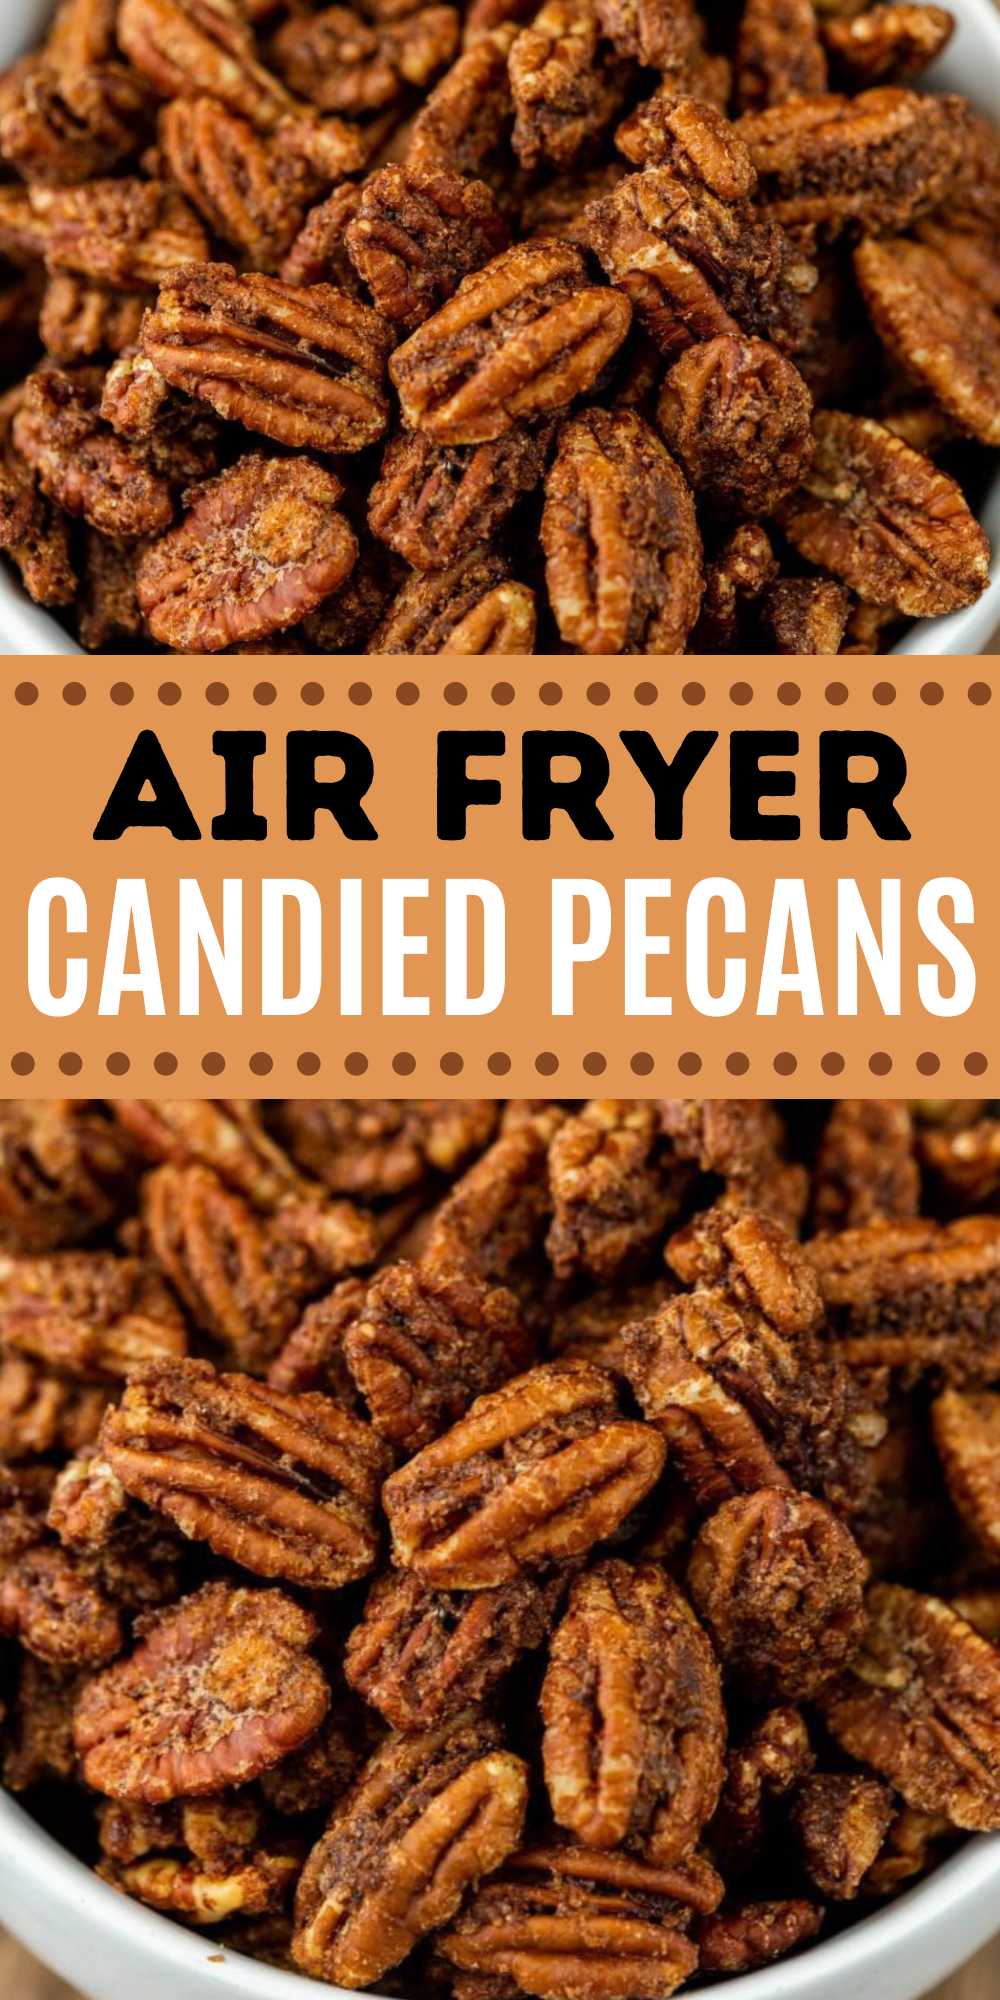 Air Fryer Candied Pecans is made with simple ingredients but they are packed with flavor. Add them to your yogurt, ice cream and more. The next time you are needing an easy snack or topping for your ice cream, make these candied pecans. We like to keep a mason jar on the counter to enjoy all week long. #eatingonadime #airfryercandiedpecans #candiedpecans